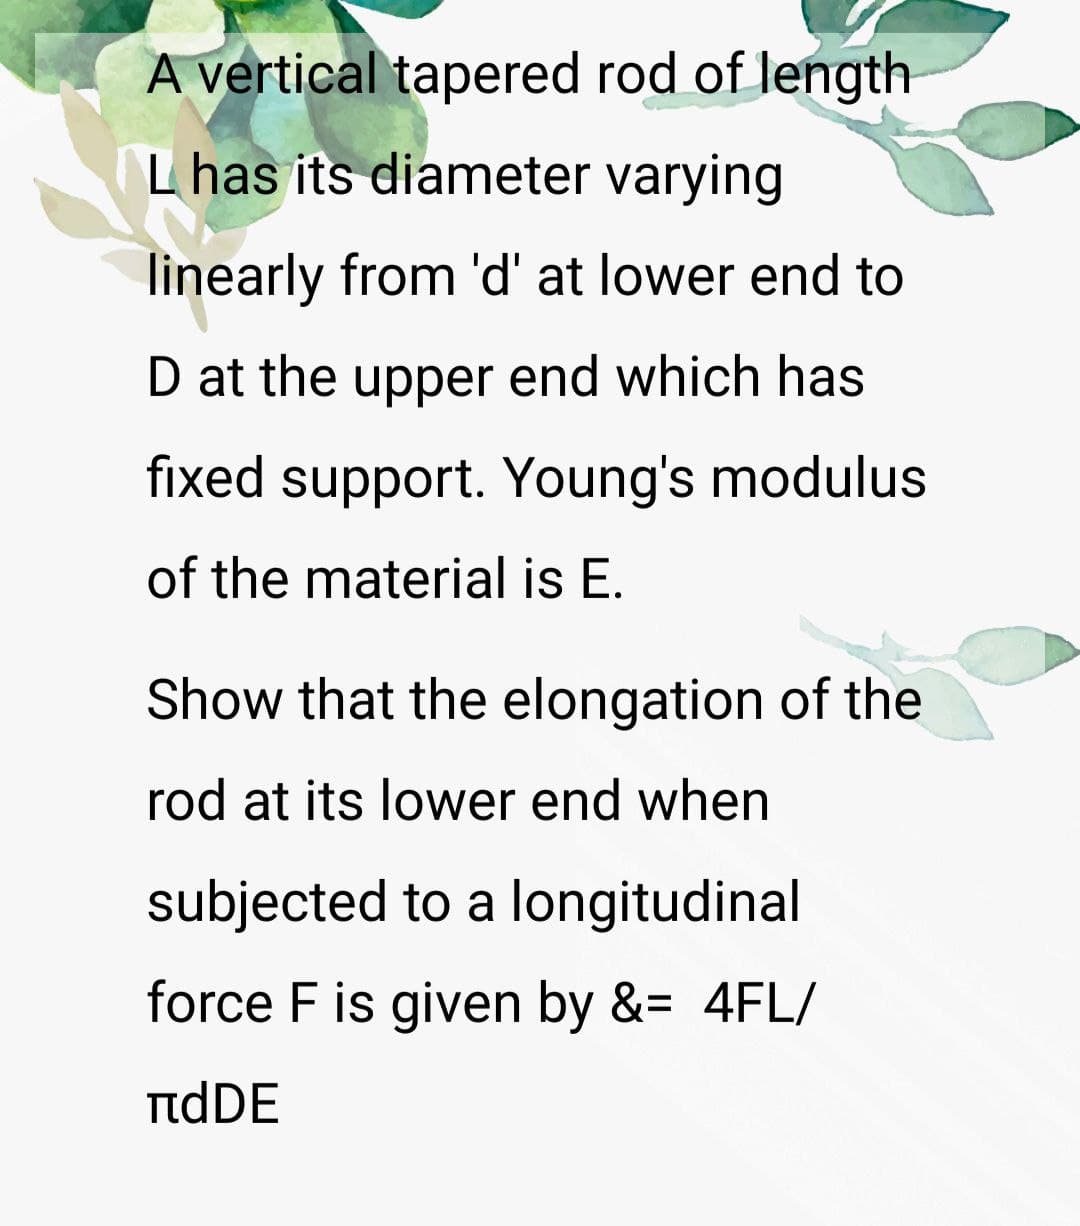 A vertical tapered rod of length
L has its diameter varying
linearly from 'd' at lower end to
D at the upper end which has
fixed support. Young's modulus
of the material is E.
Show that the elongation of the
rod at its lower end when
subjected to a longitudinal
force F is given by &= 4FL/
πdDE